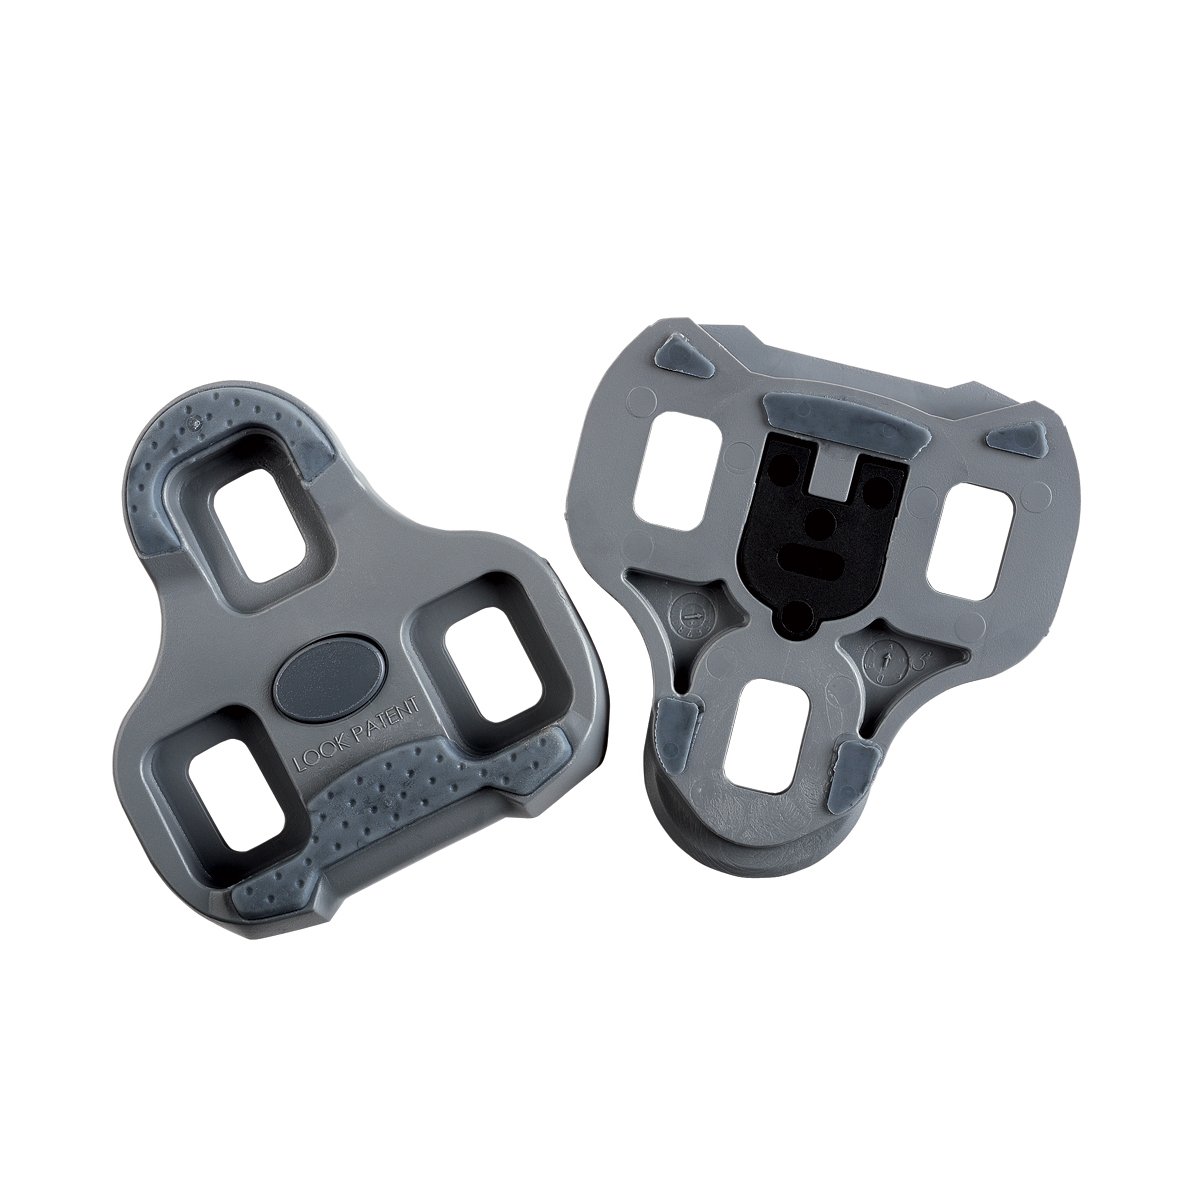 LOOK KEO Grip Pedal Cleats-Grey-4.5 Degrees